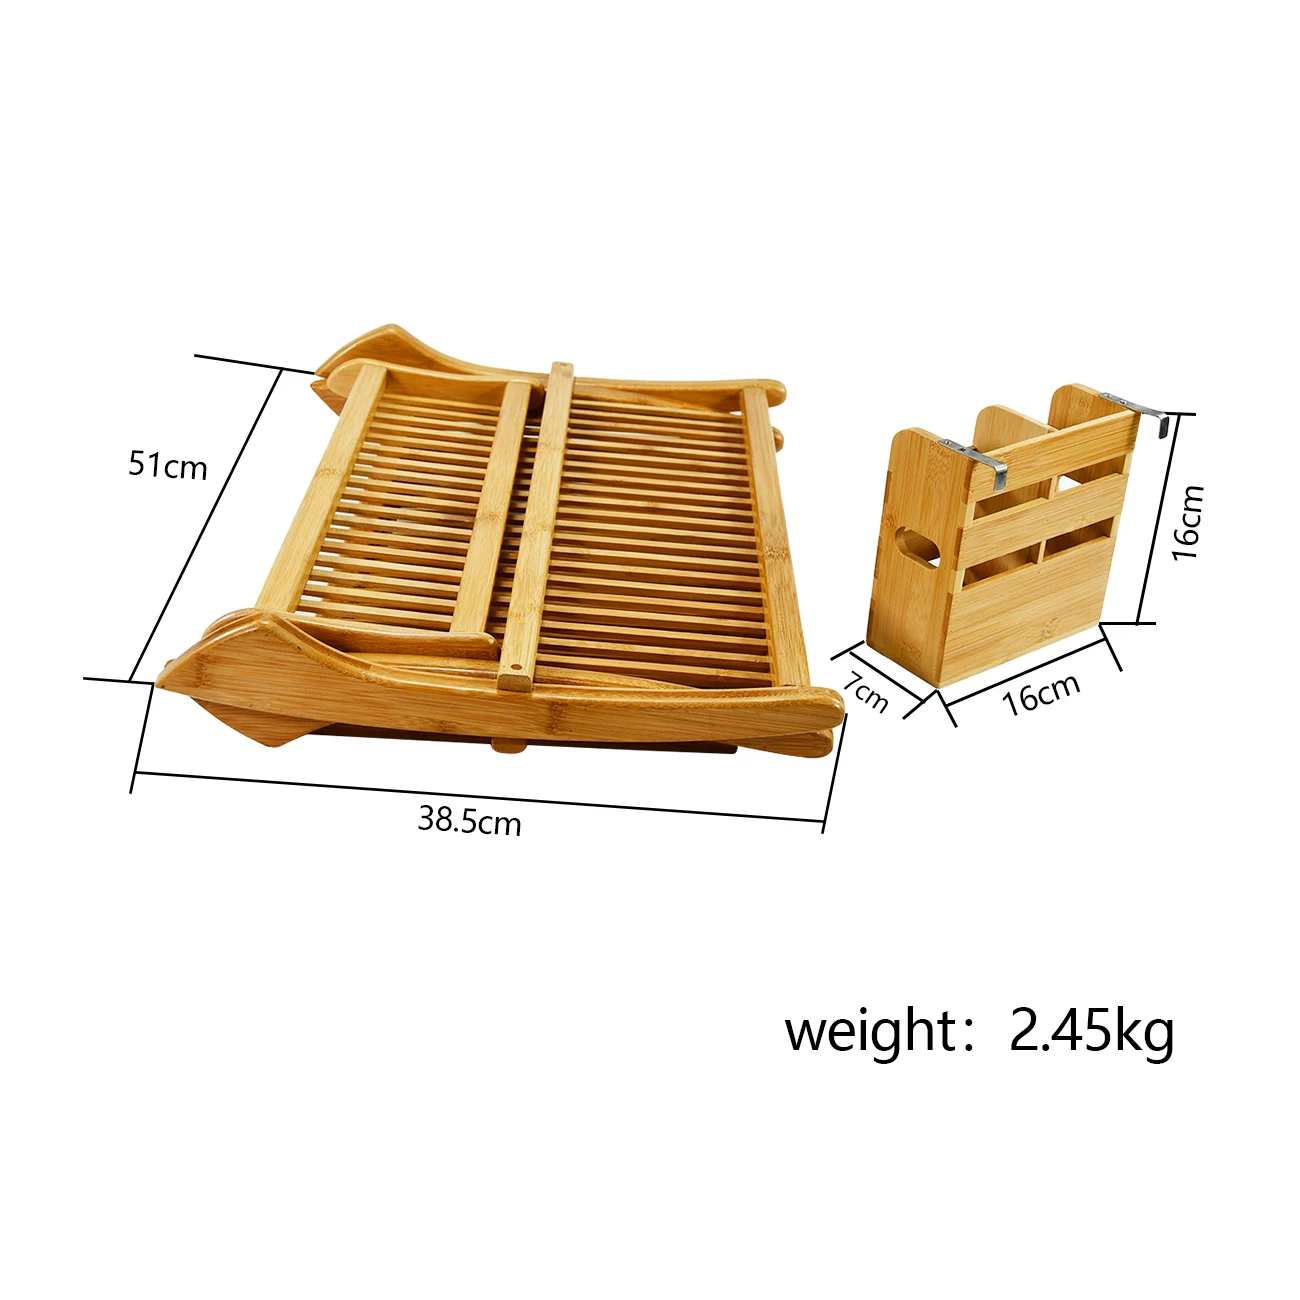 Bamboo Dish Drying Rack with Utensils Flatware Holder Set Large Folding Drying Holder for Kitchen, Collapsible Drainer